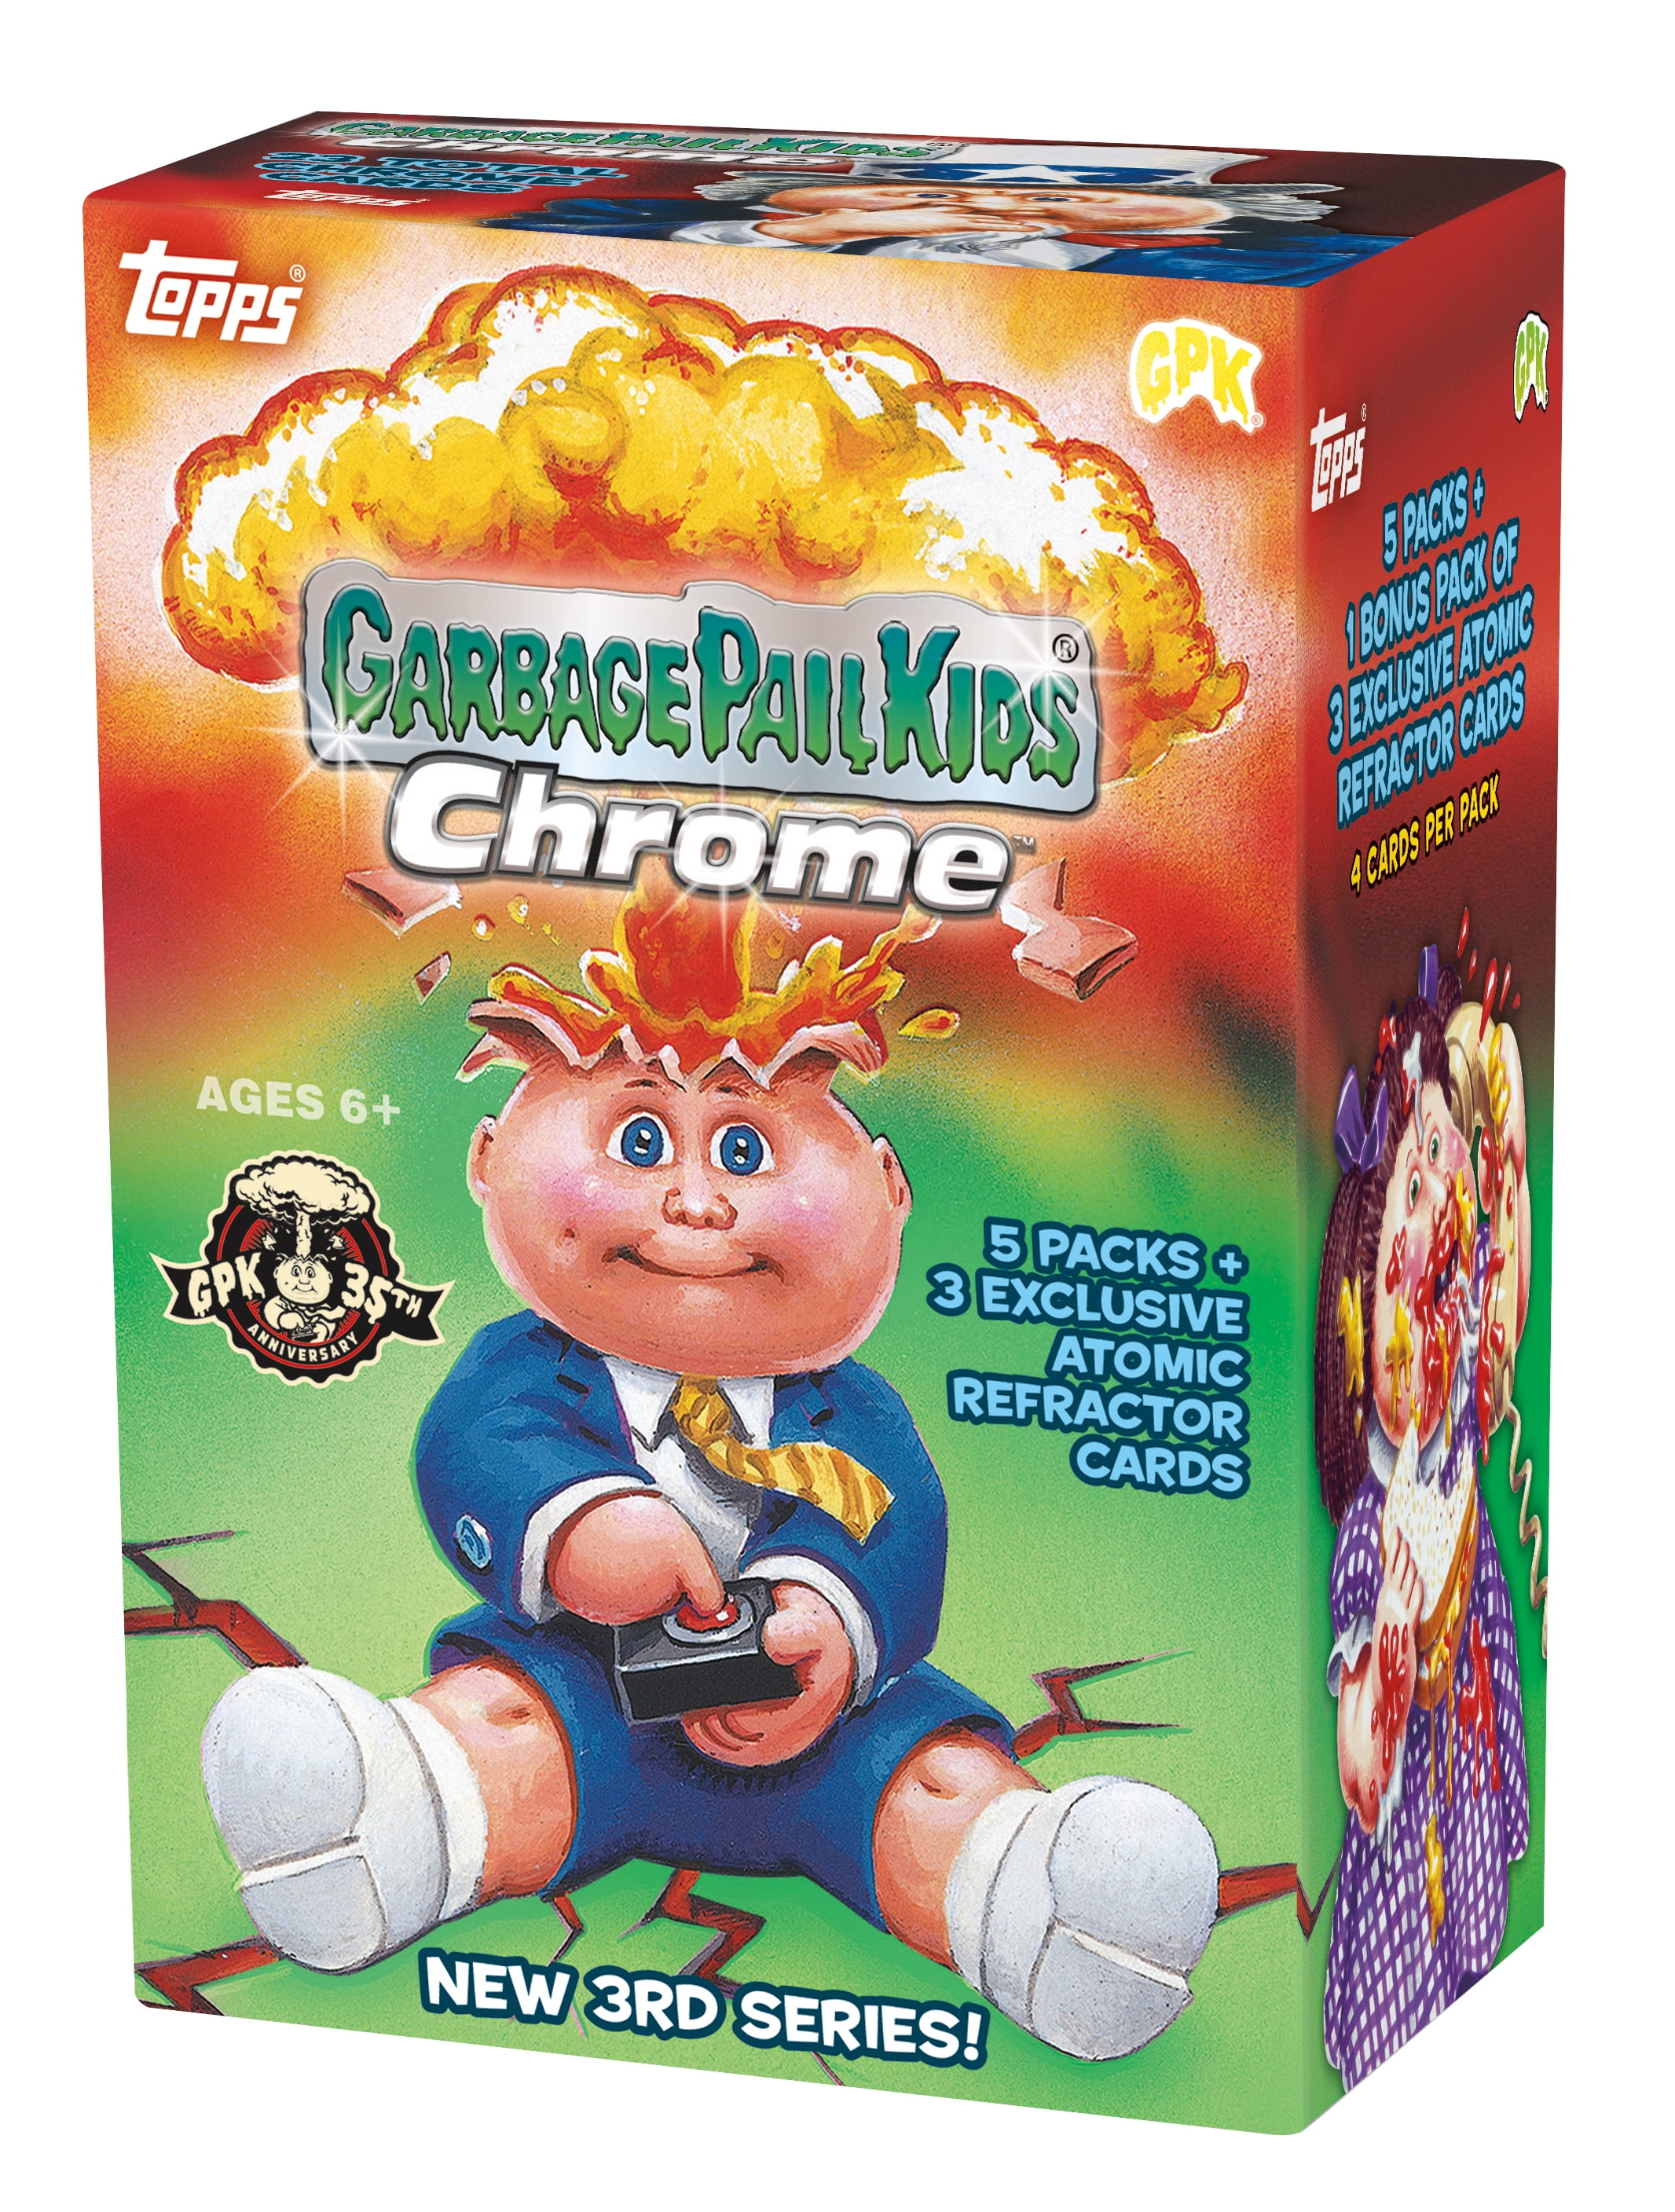 2020 Topps Chrome Garbage Pail Kids Series 3 Value Fat Pack Lot 5 Free Pack 